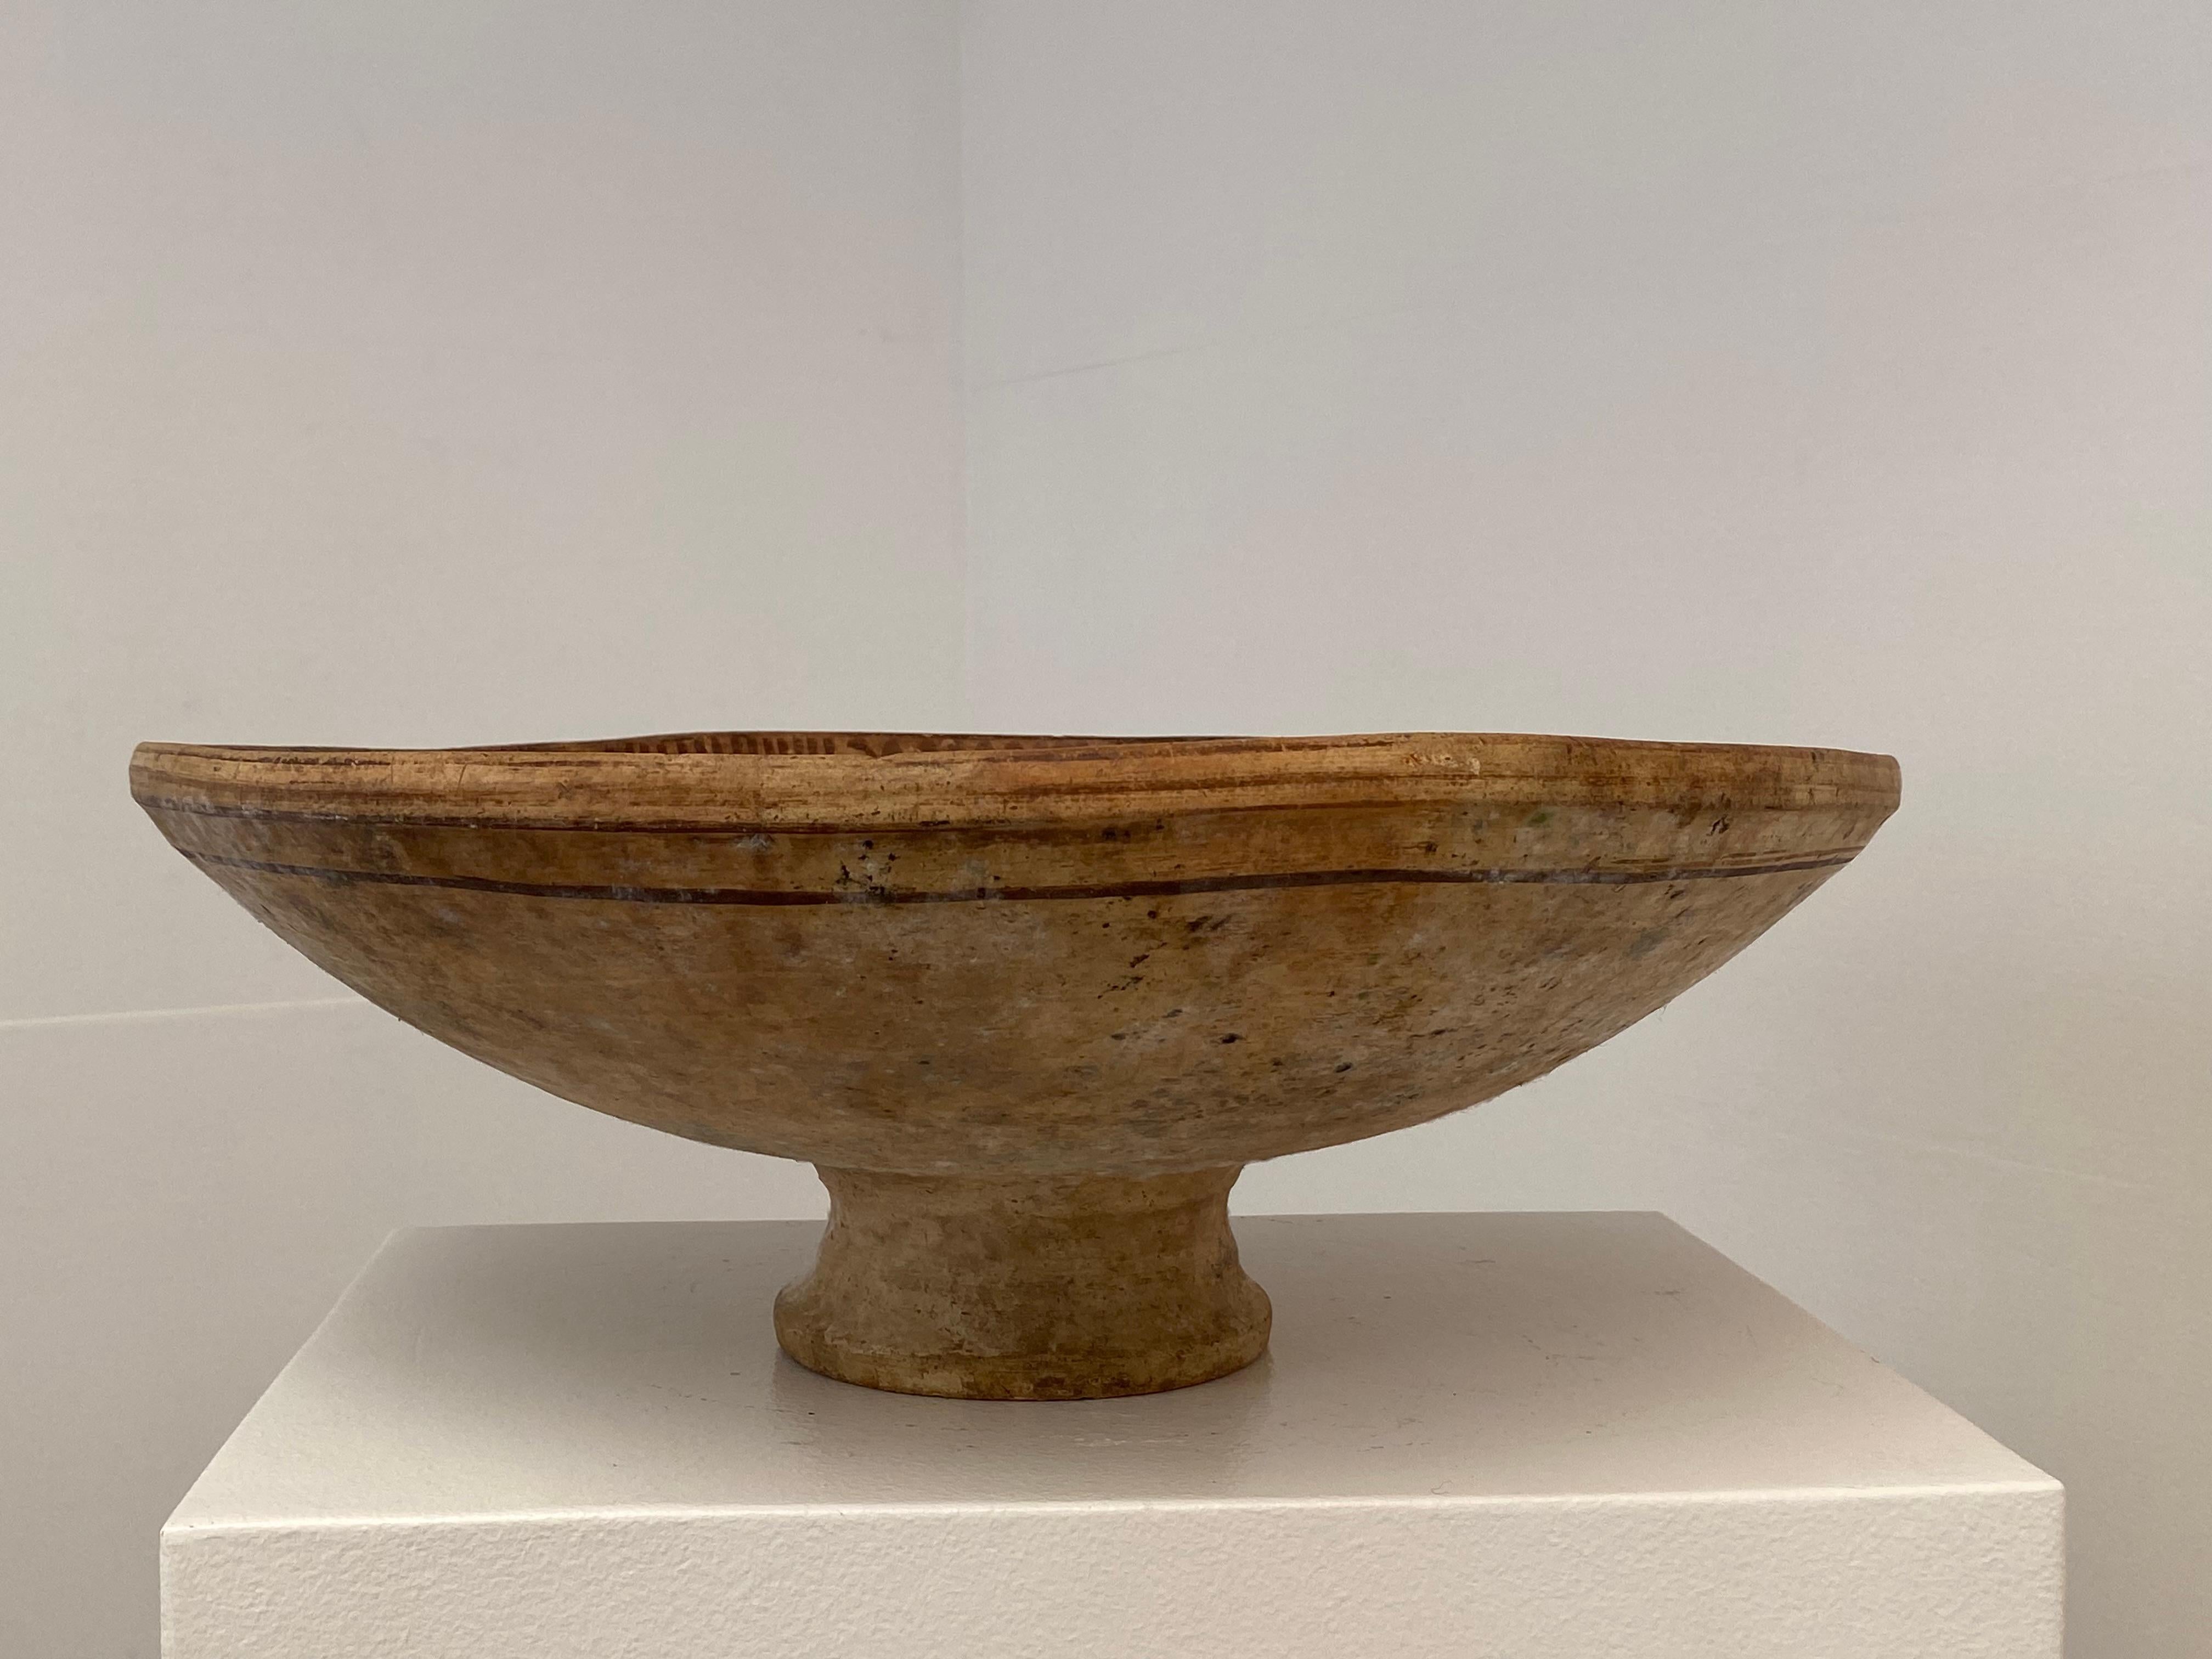 Antique, Terracotta Berber Bowl on a central foot For Sale 8